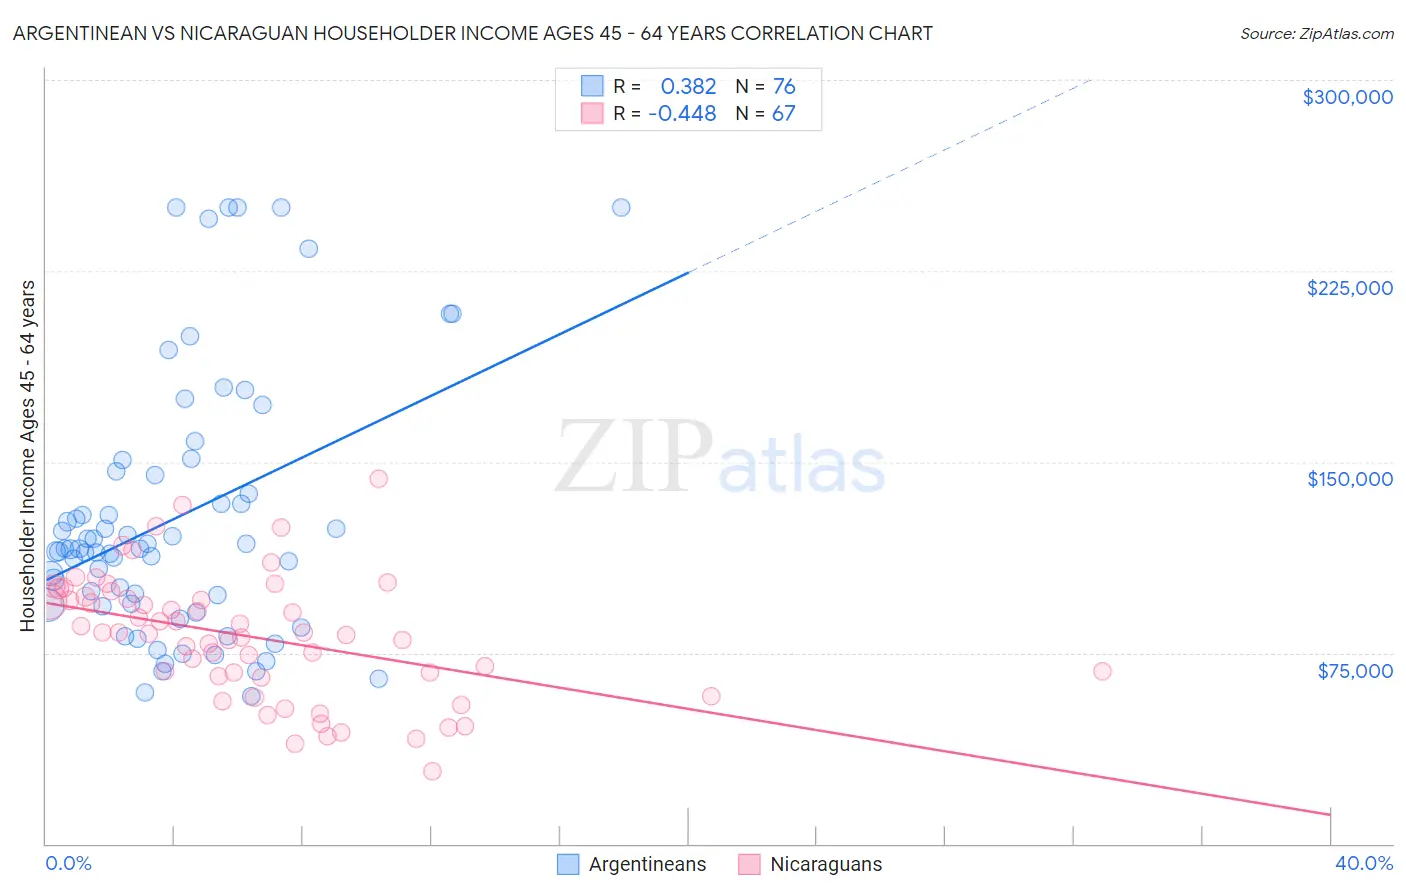 Argentinean vs Nicaraguan Householder Income Ages 45 - 64 years